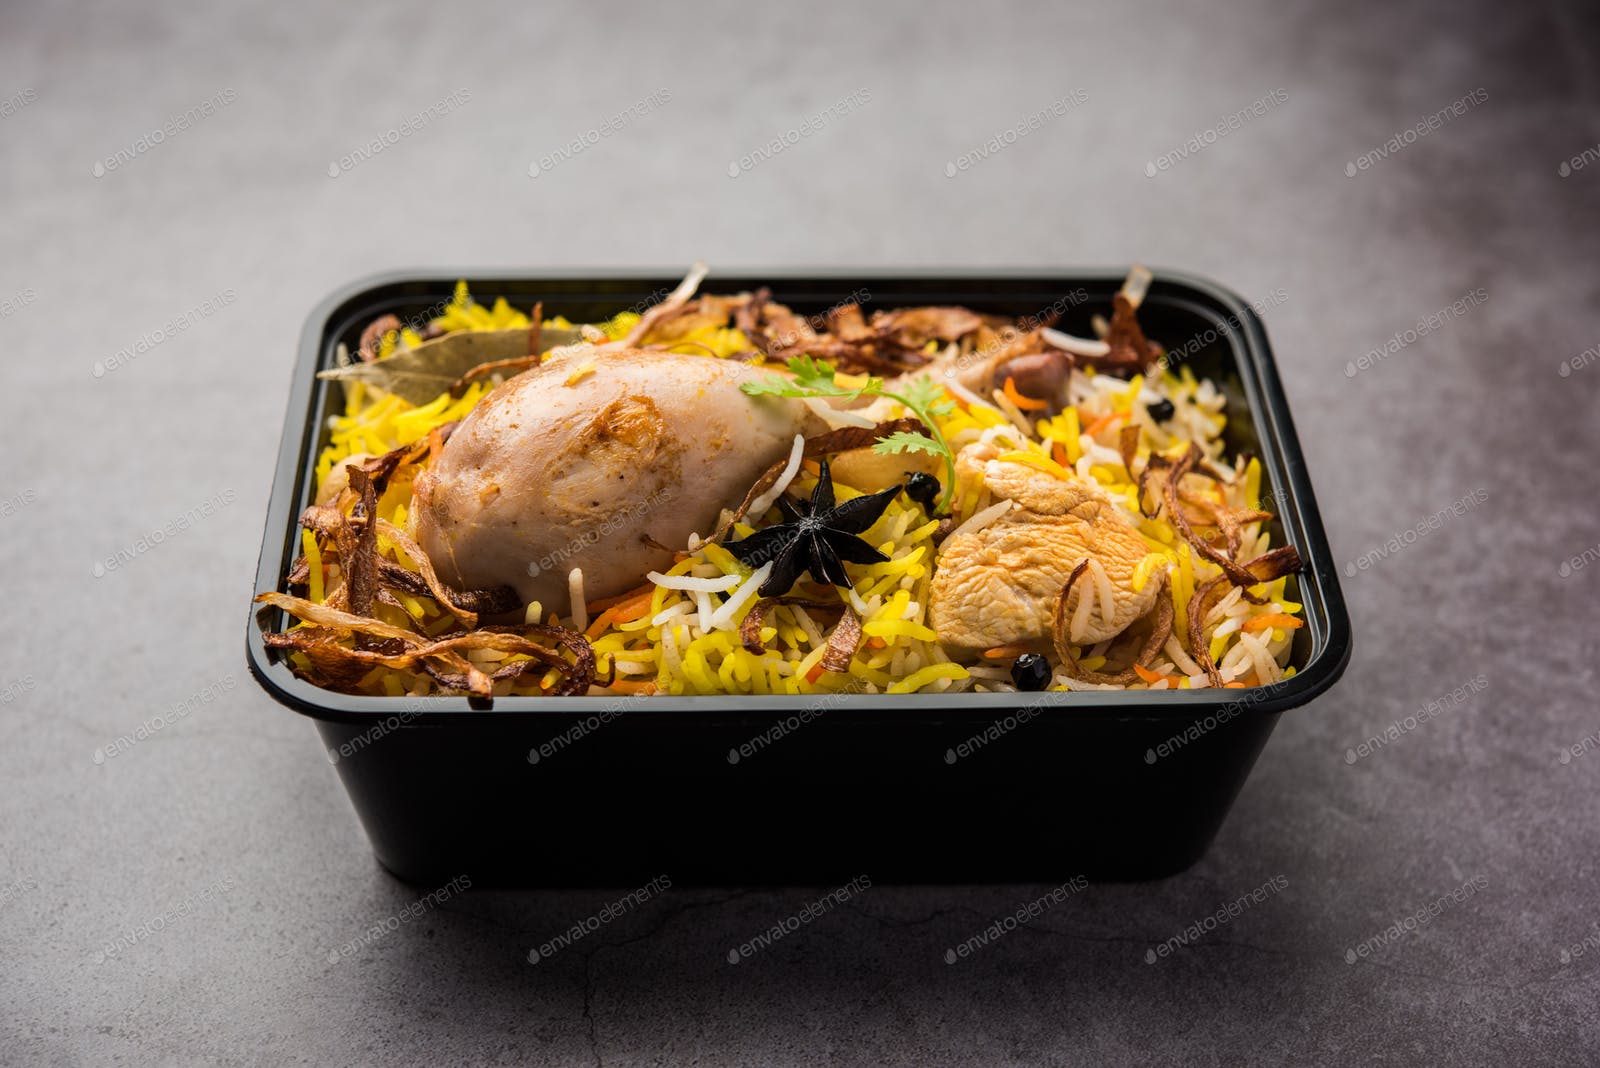 Online Food Delivery Biryani packed in Plastic box photo by stockimagefactory on Envato Elements